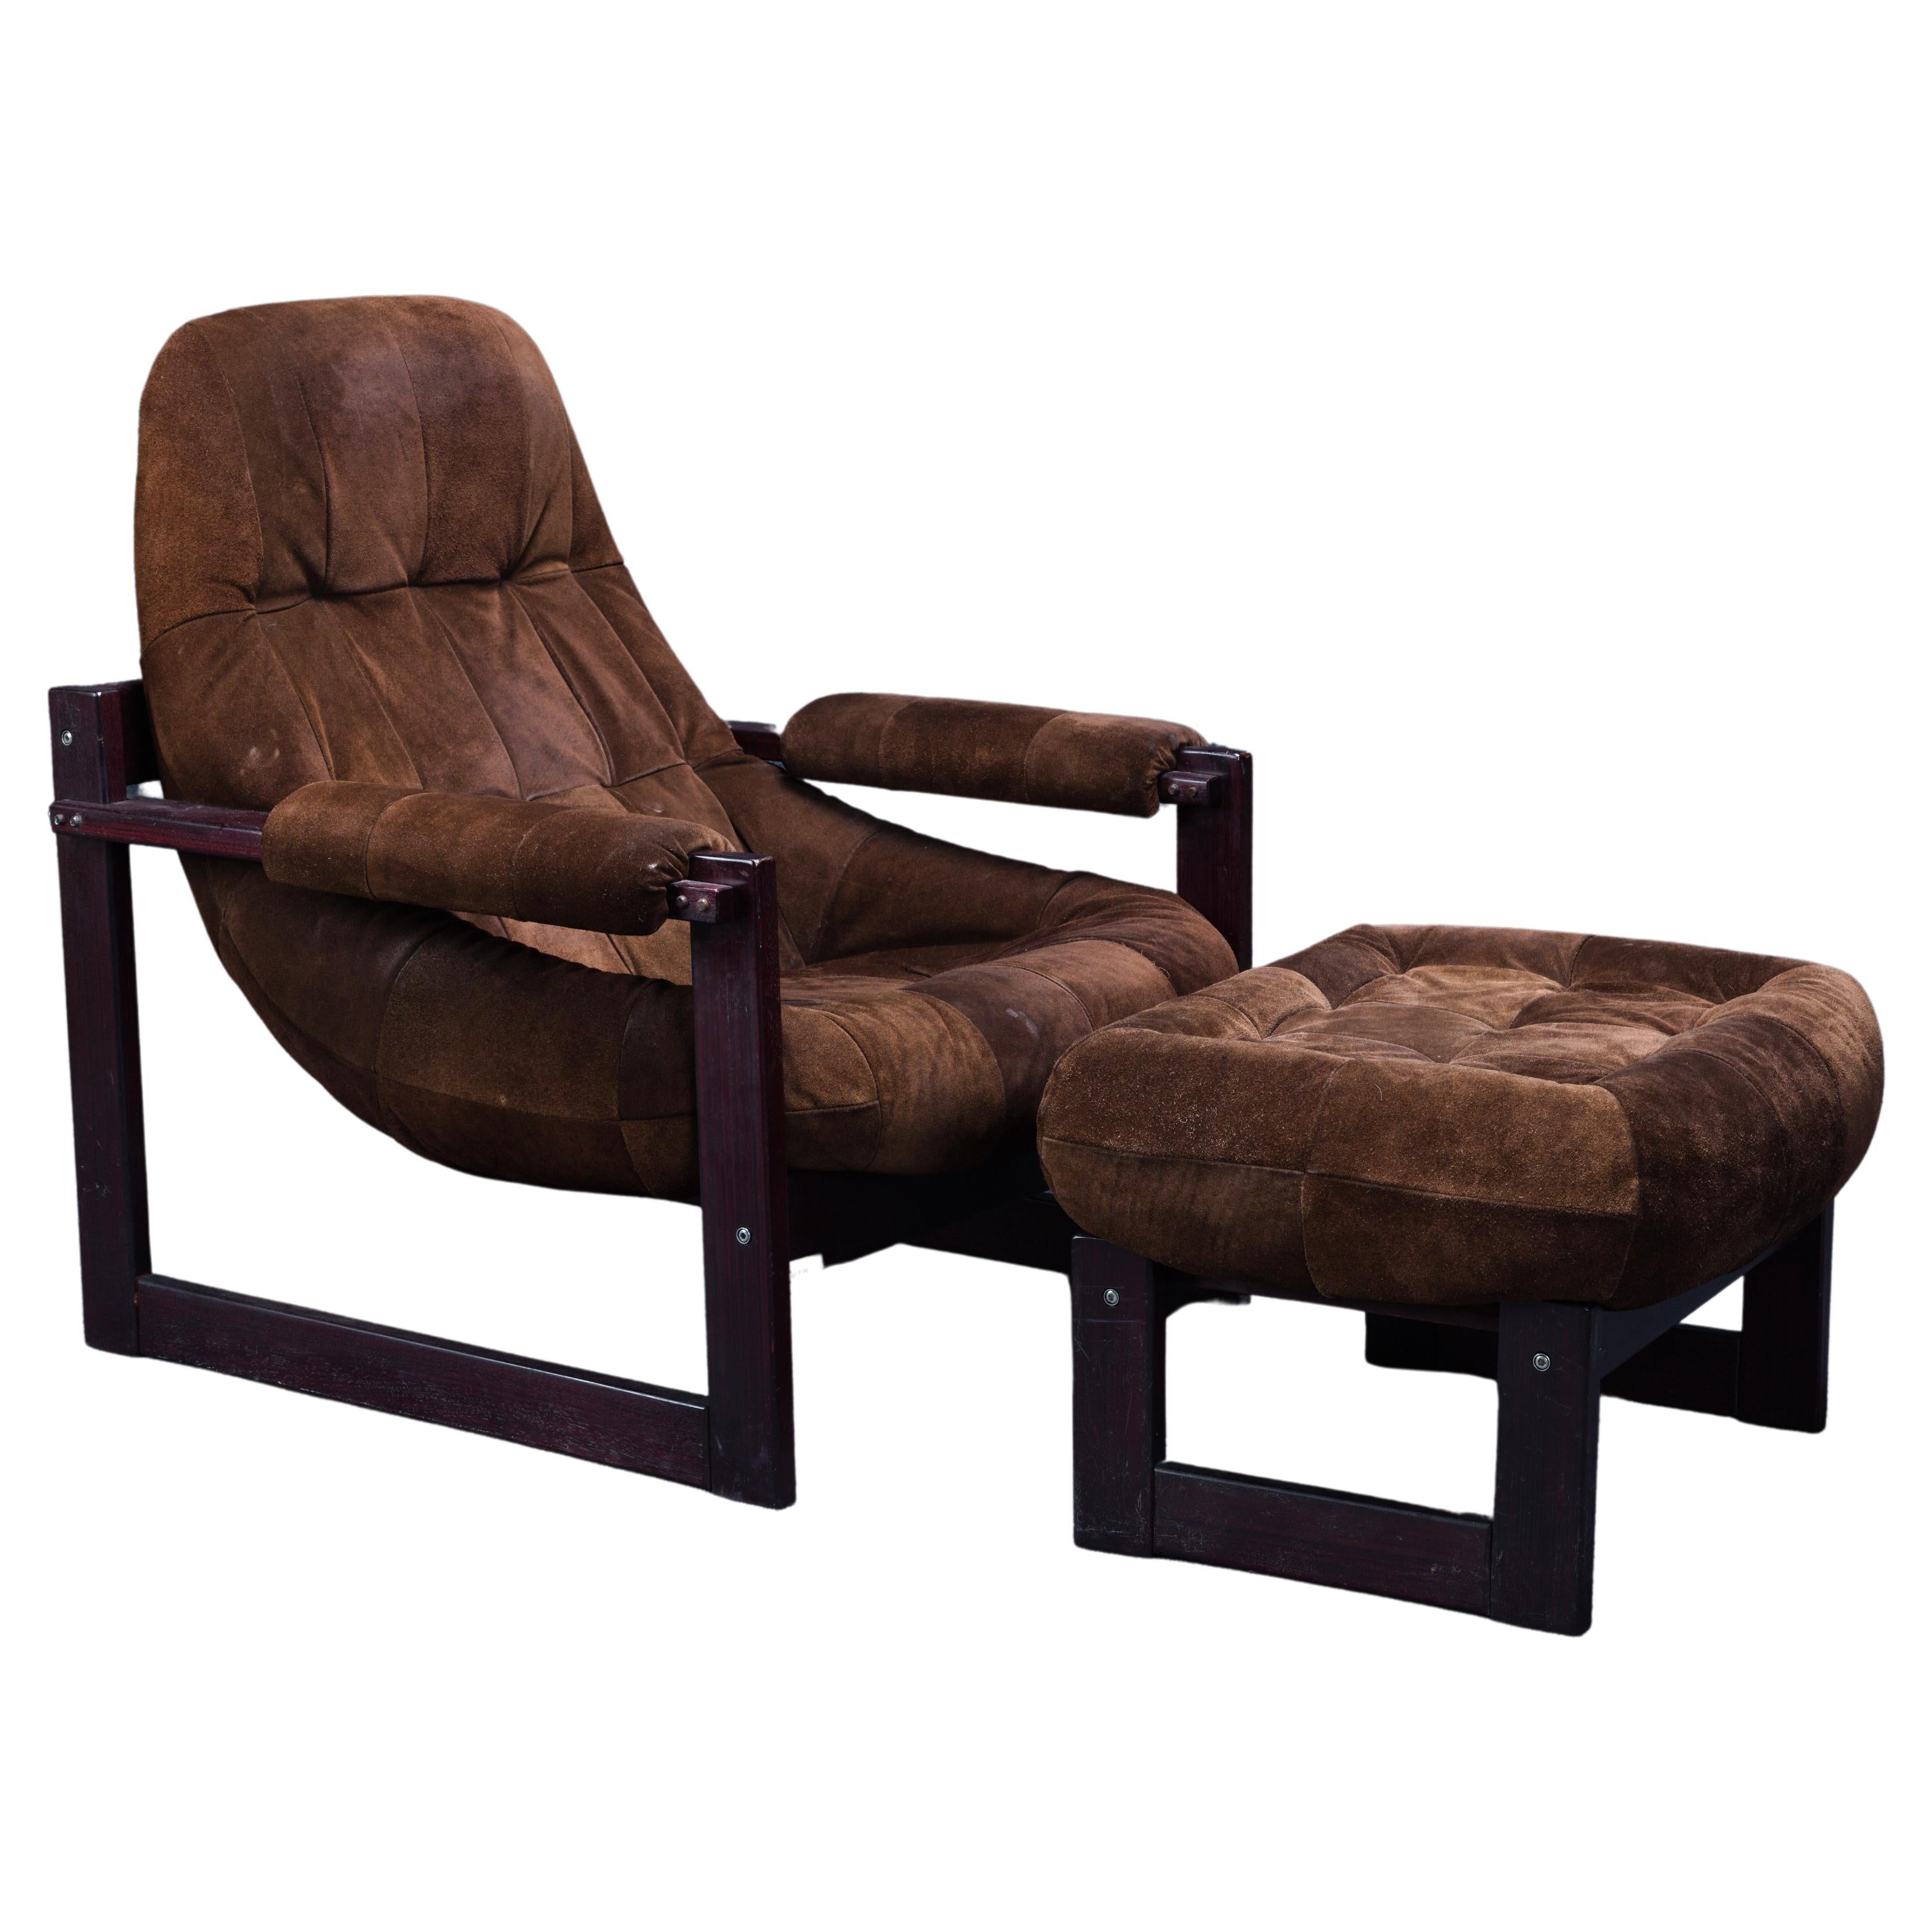 Brazilian Mid-Century Modern Armchair/Ottoman by Percival Lafer in Suede Leather For Sale